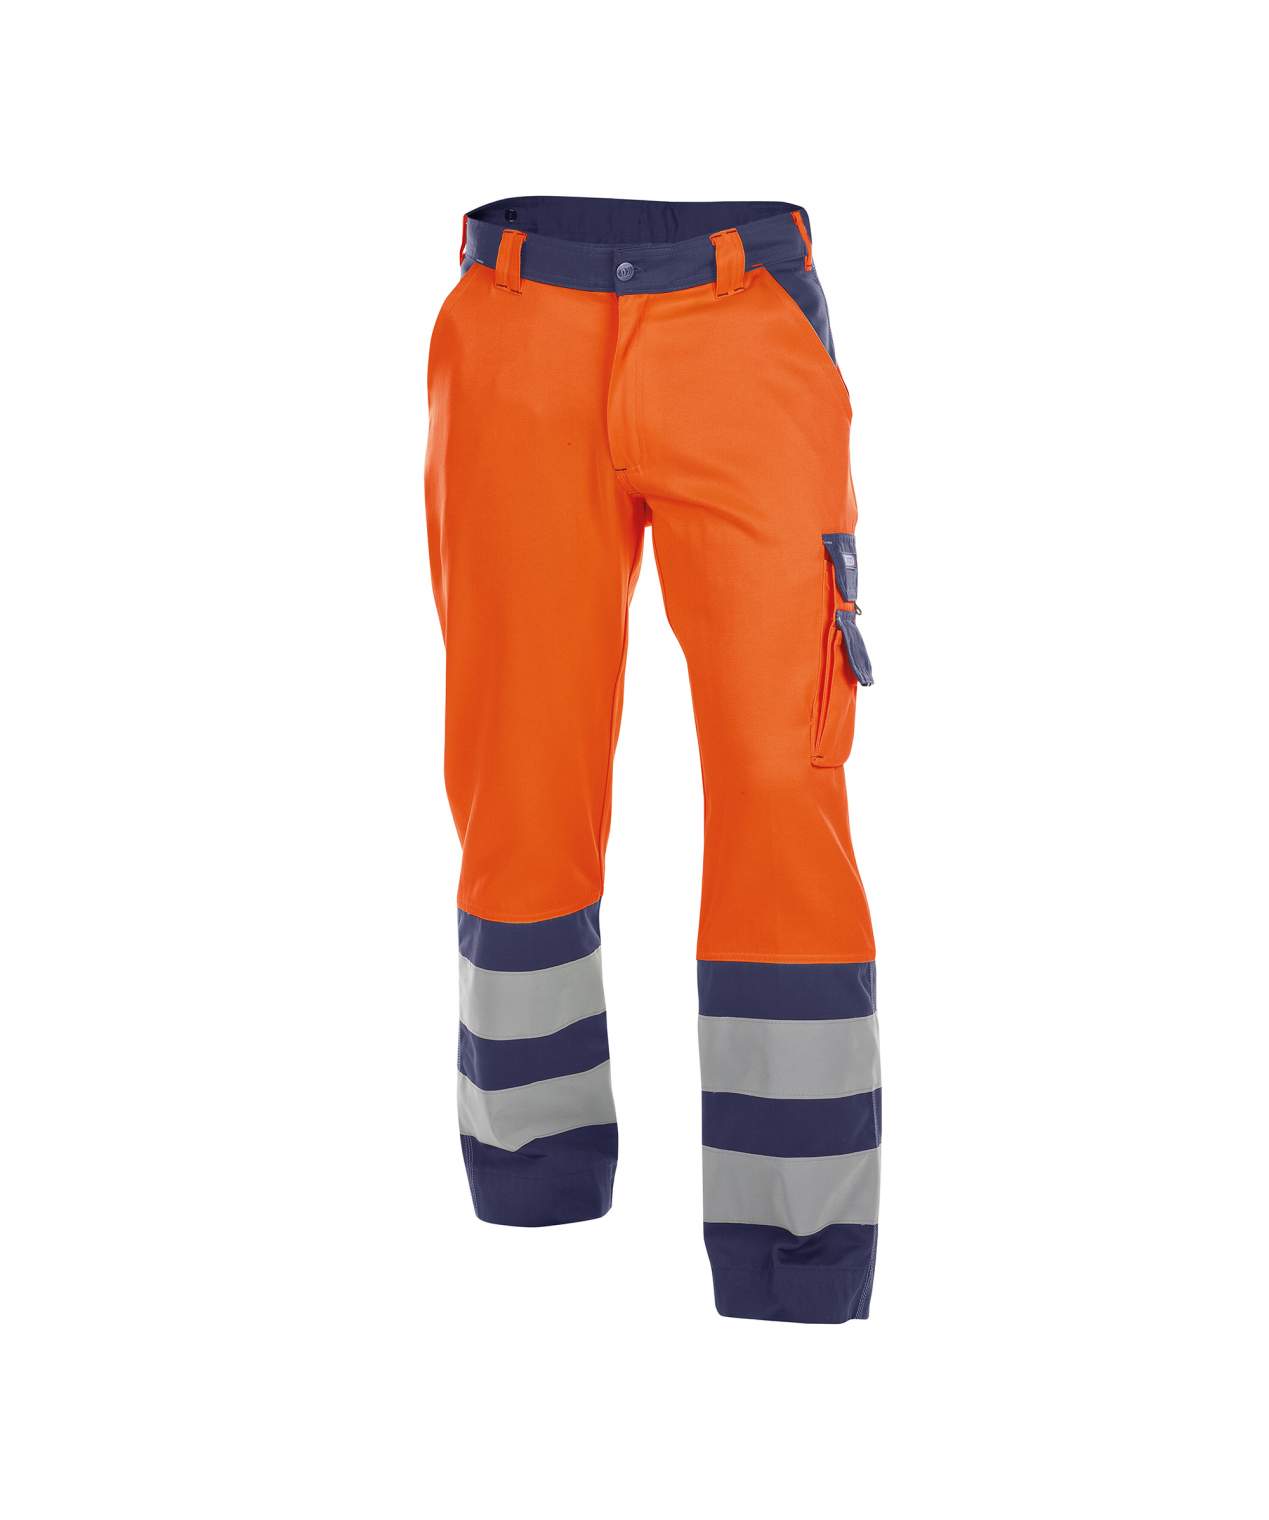 lancaster high visibility work trousers fluo orange navy front